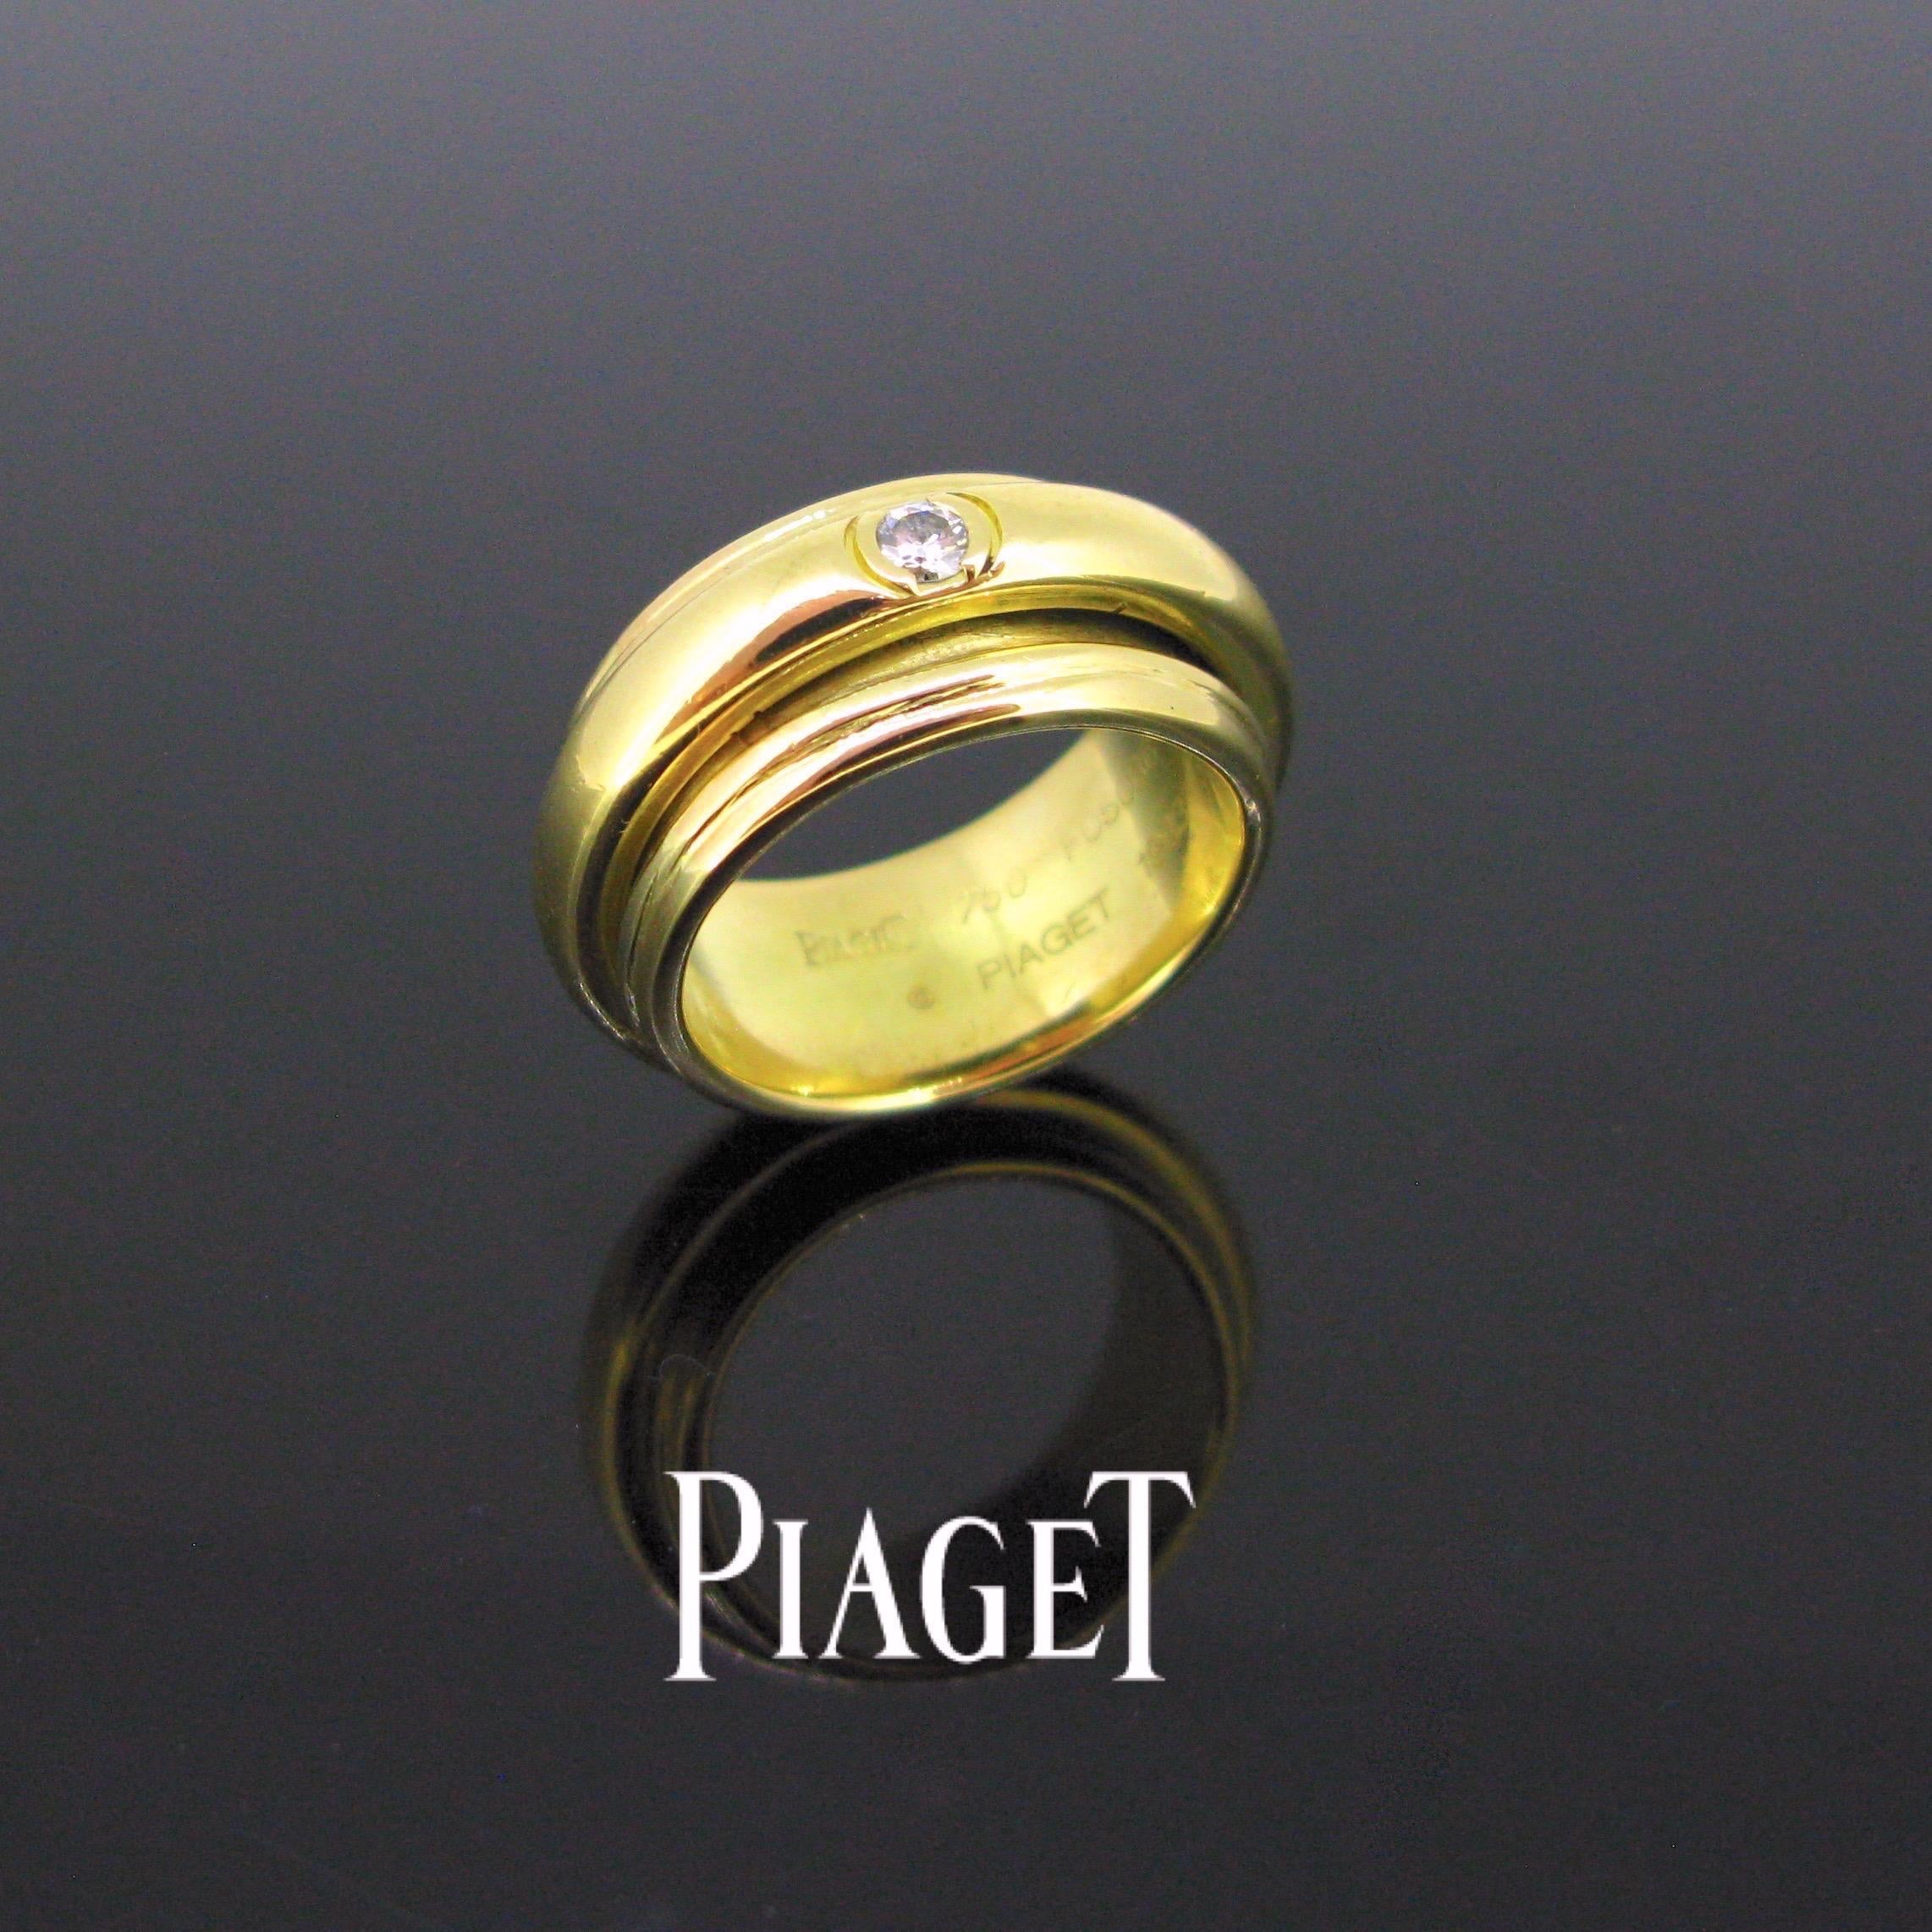 Weight:	21.25gr


Metal:	18kt yellow Gold 


Stones:	1 Diamond
•	Cut:	Brilliant
•	Total carat weight:	0.15ct approximately
•	Colour:	E/F
•	Clarity:		VVS

Condition:	Very Good


Signature:	PIAGET, nº F05066 


Comments:	This bold ring is from